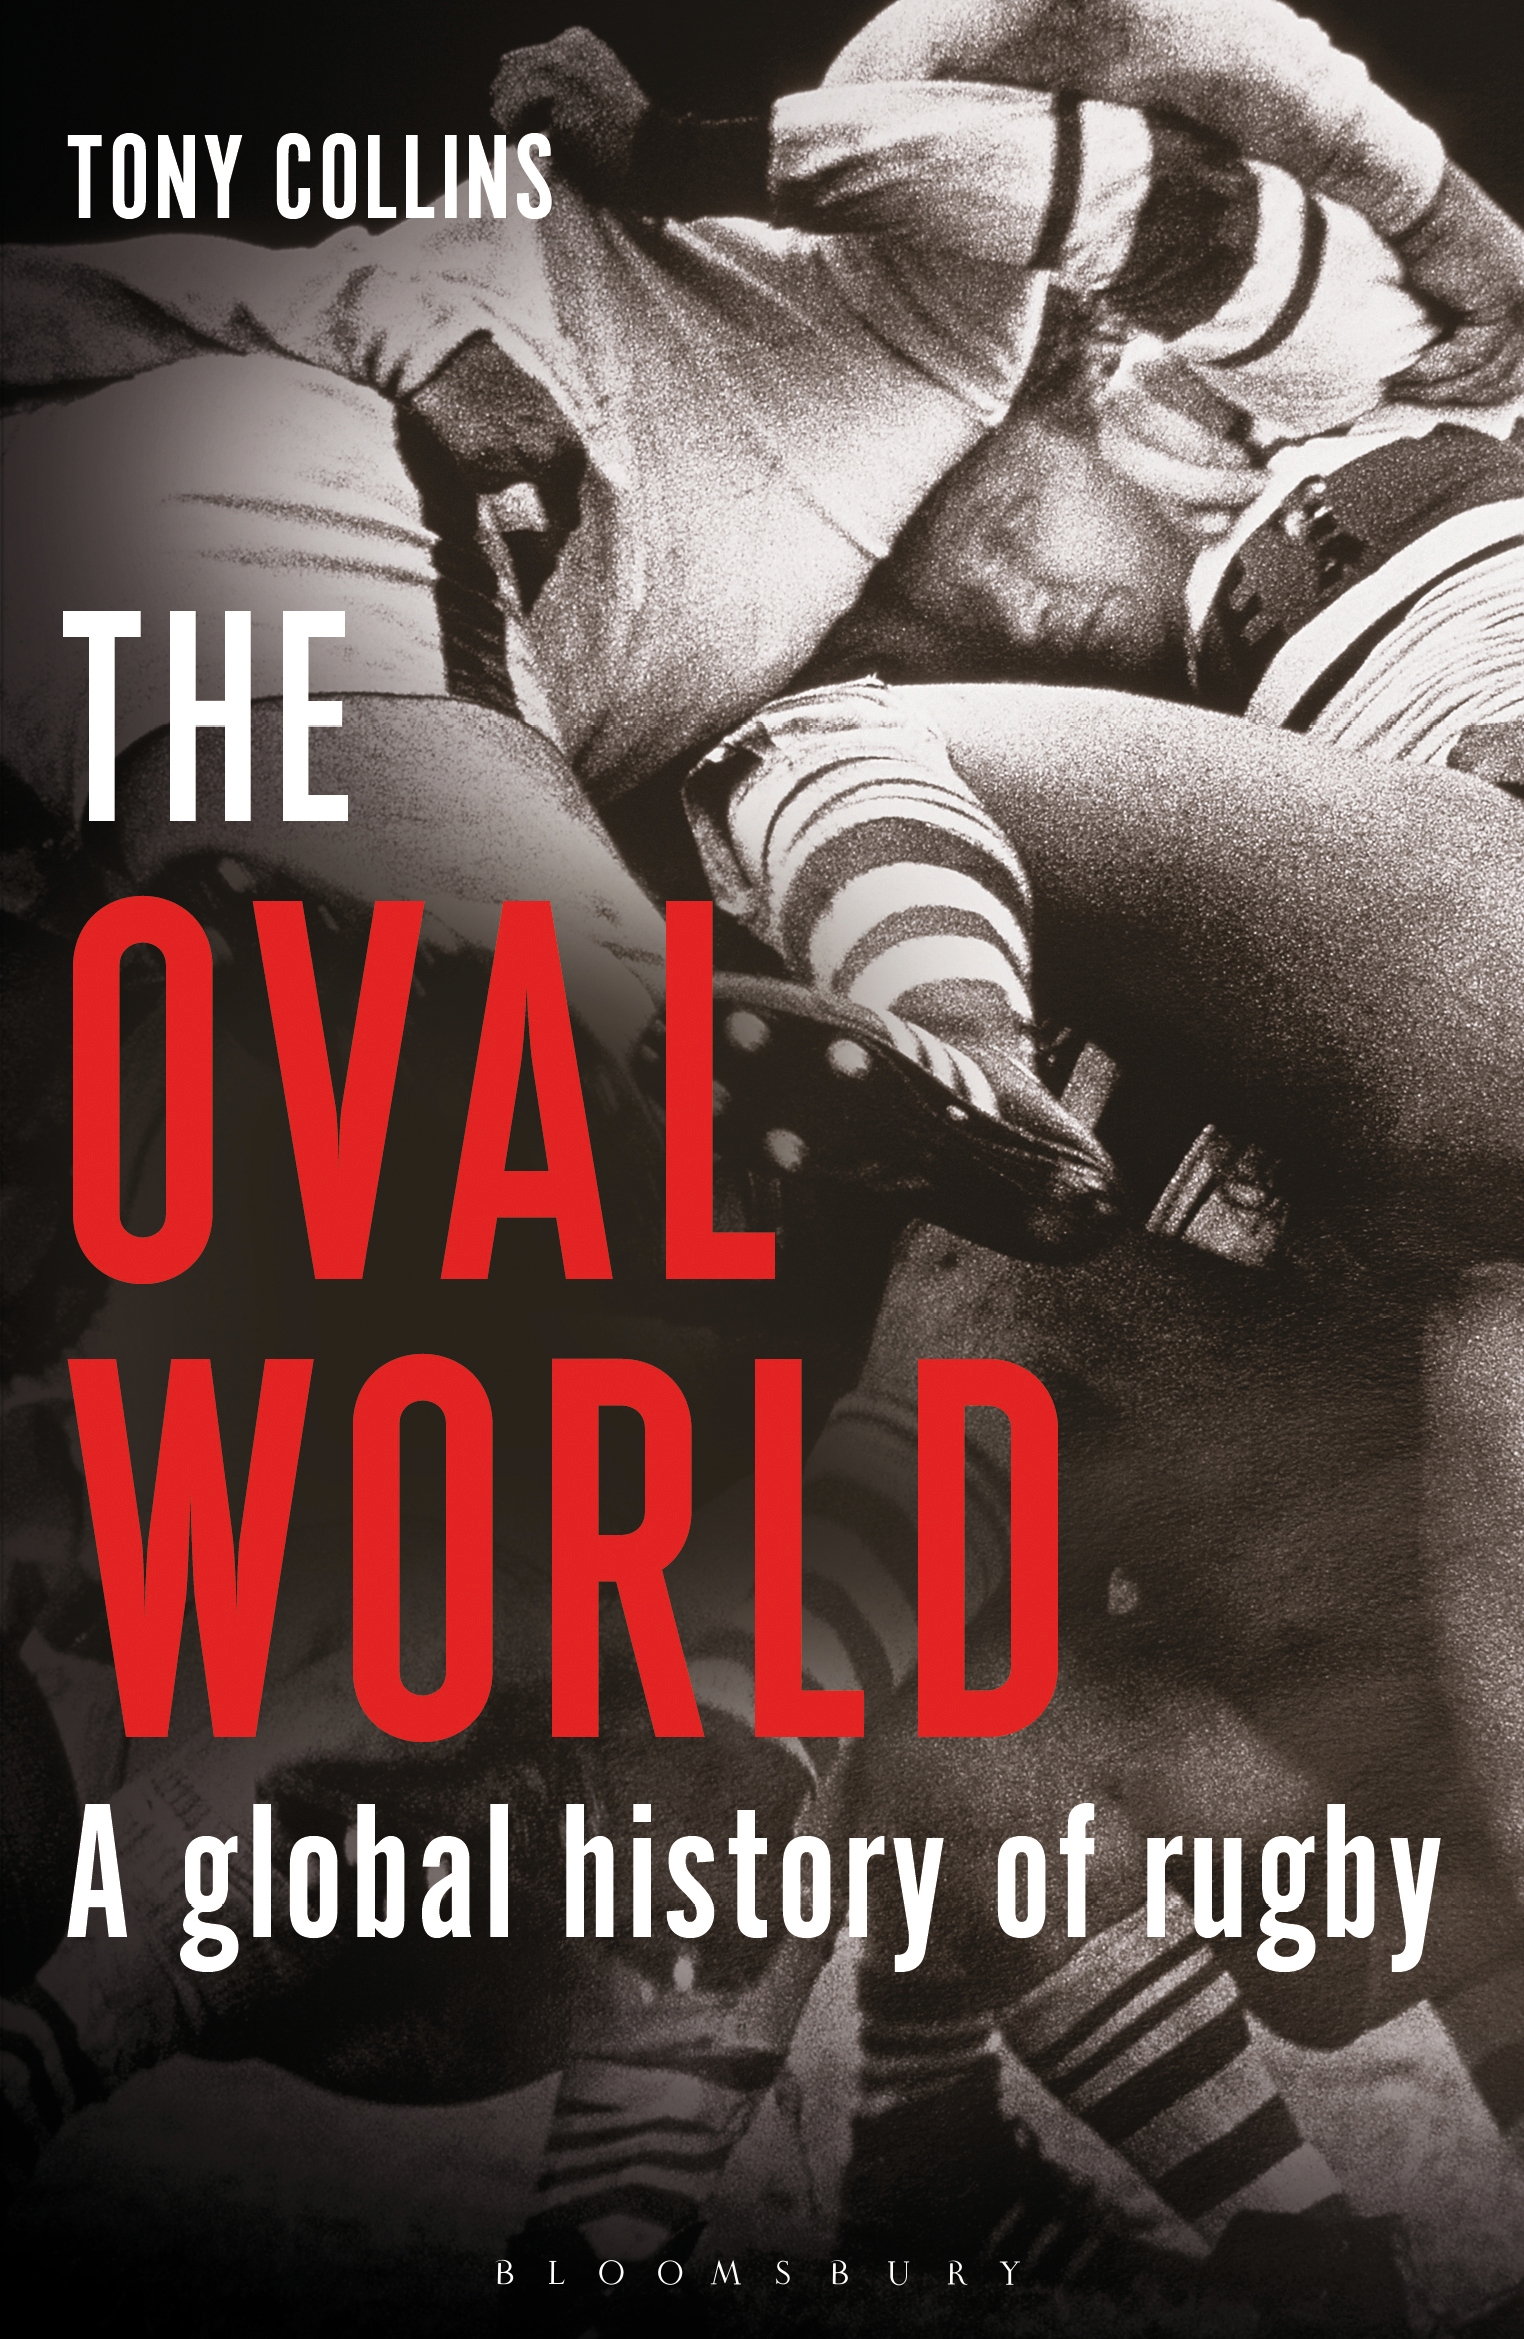 THE OVAL WORLD The Oval World A Global History of Rugby Tony Collins - photo 1